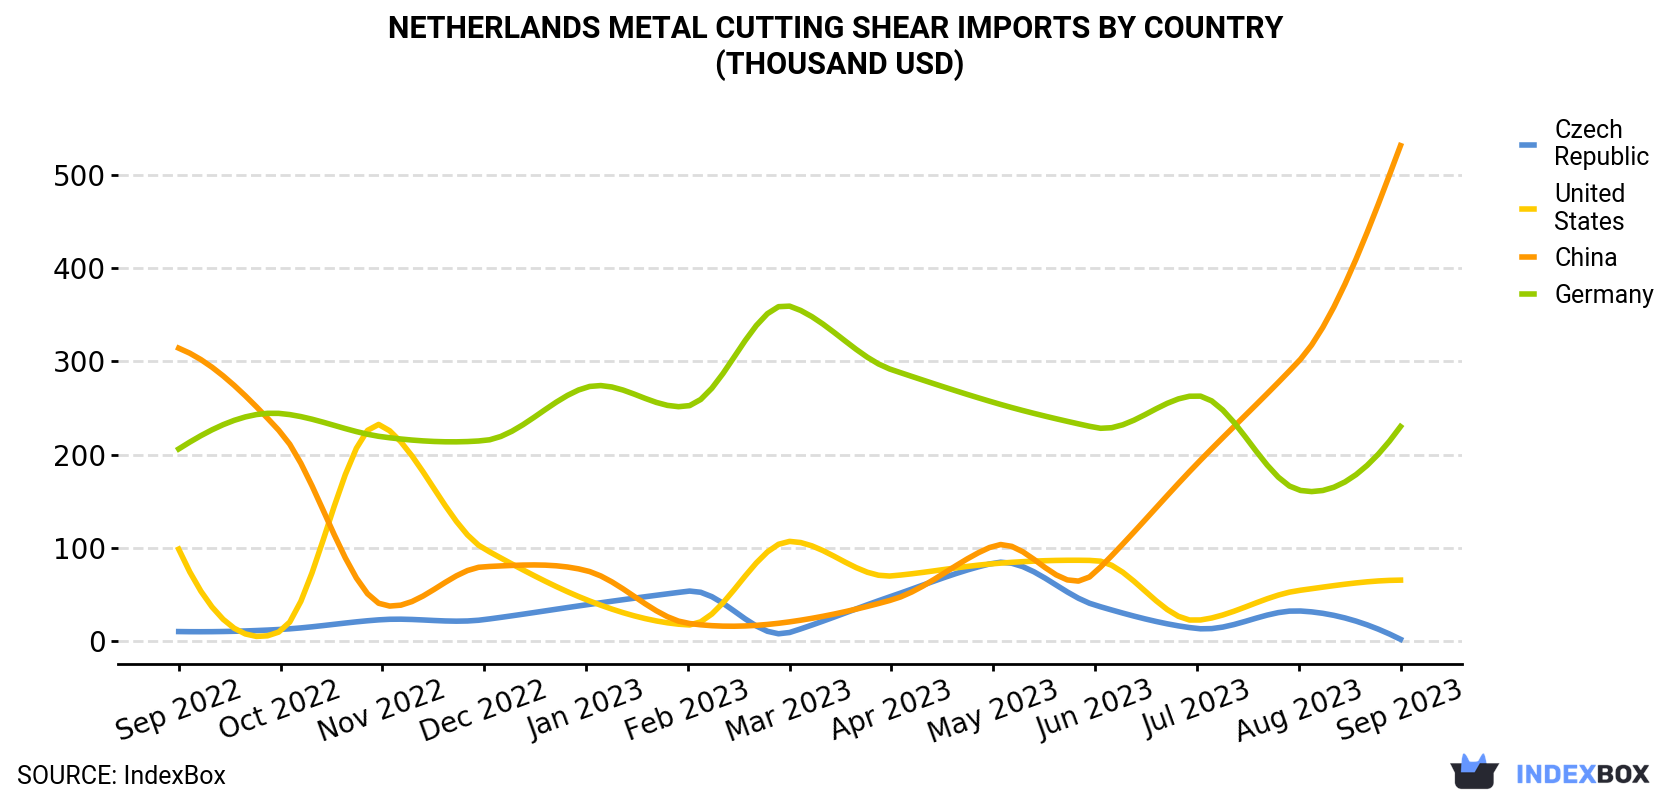 Netherlands Metal Cutting Shear Imports By Country (Thousand USD)